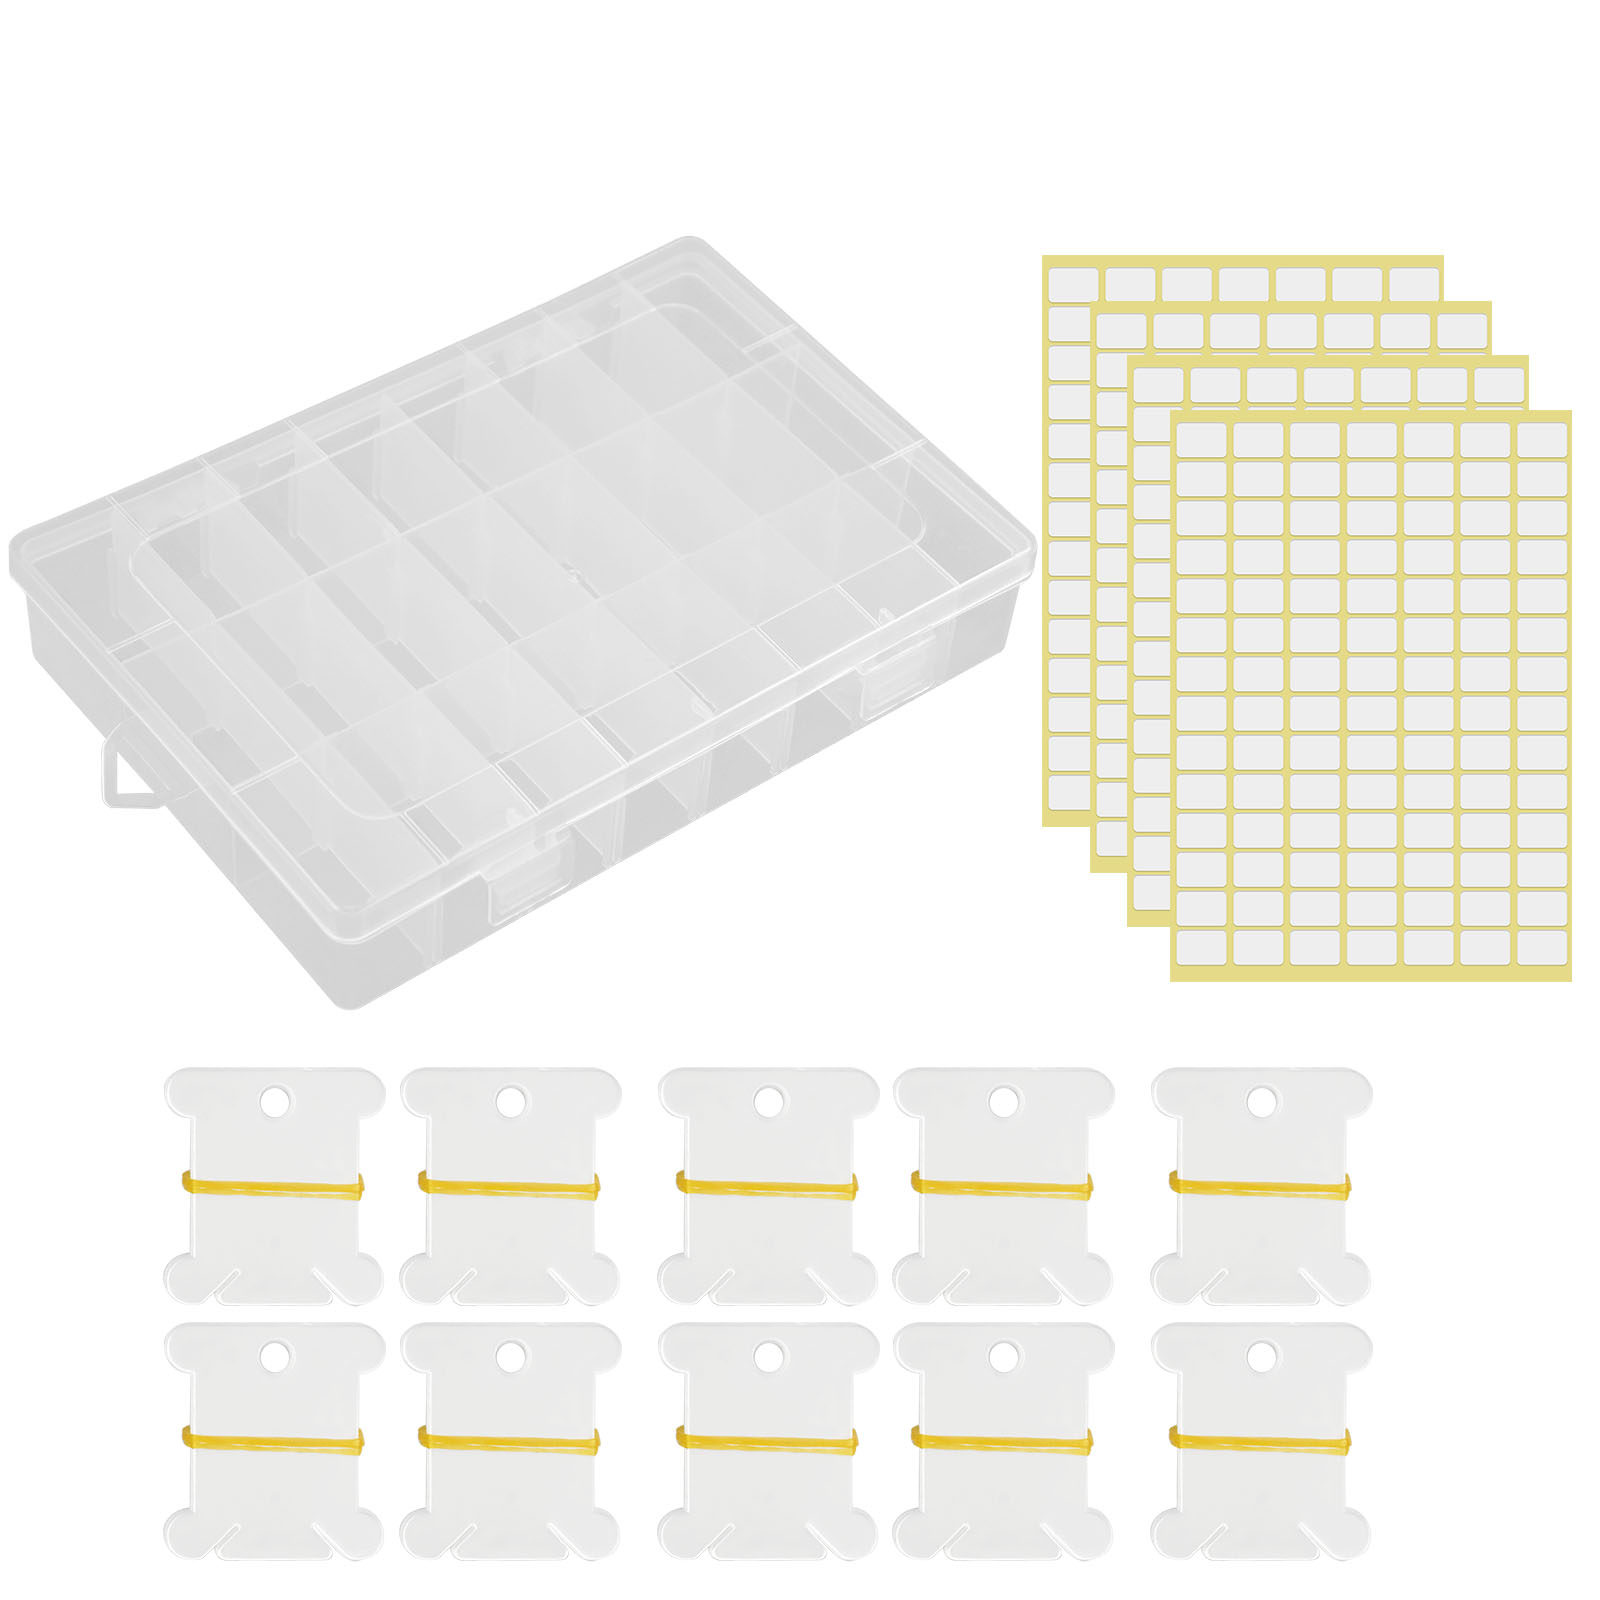  Caydo 2 Pieces Plastic Embroidery Floss Organizer, 24 Grids  Cross Stitch Thread Box with 150 Hard Floss Bobbins 552 Floss Number  Stickers and 165 Blank Stickers : Arts, Crafts & Sewing